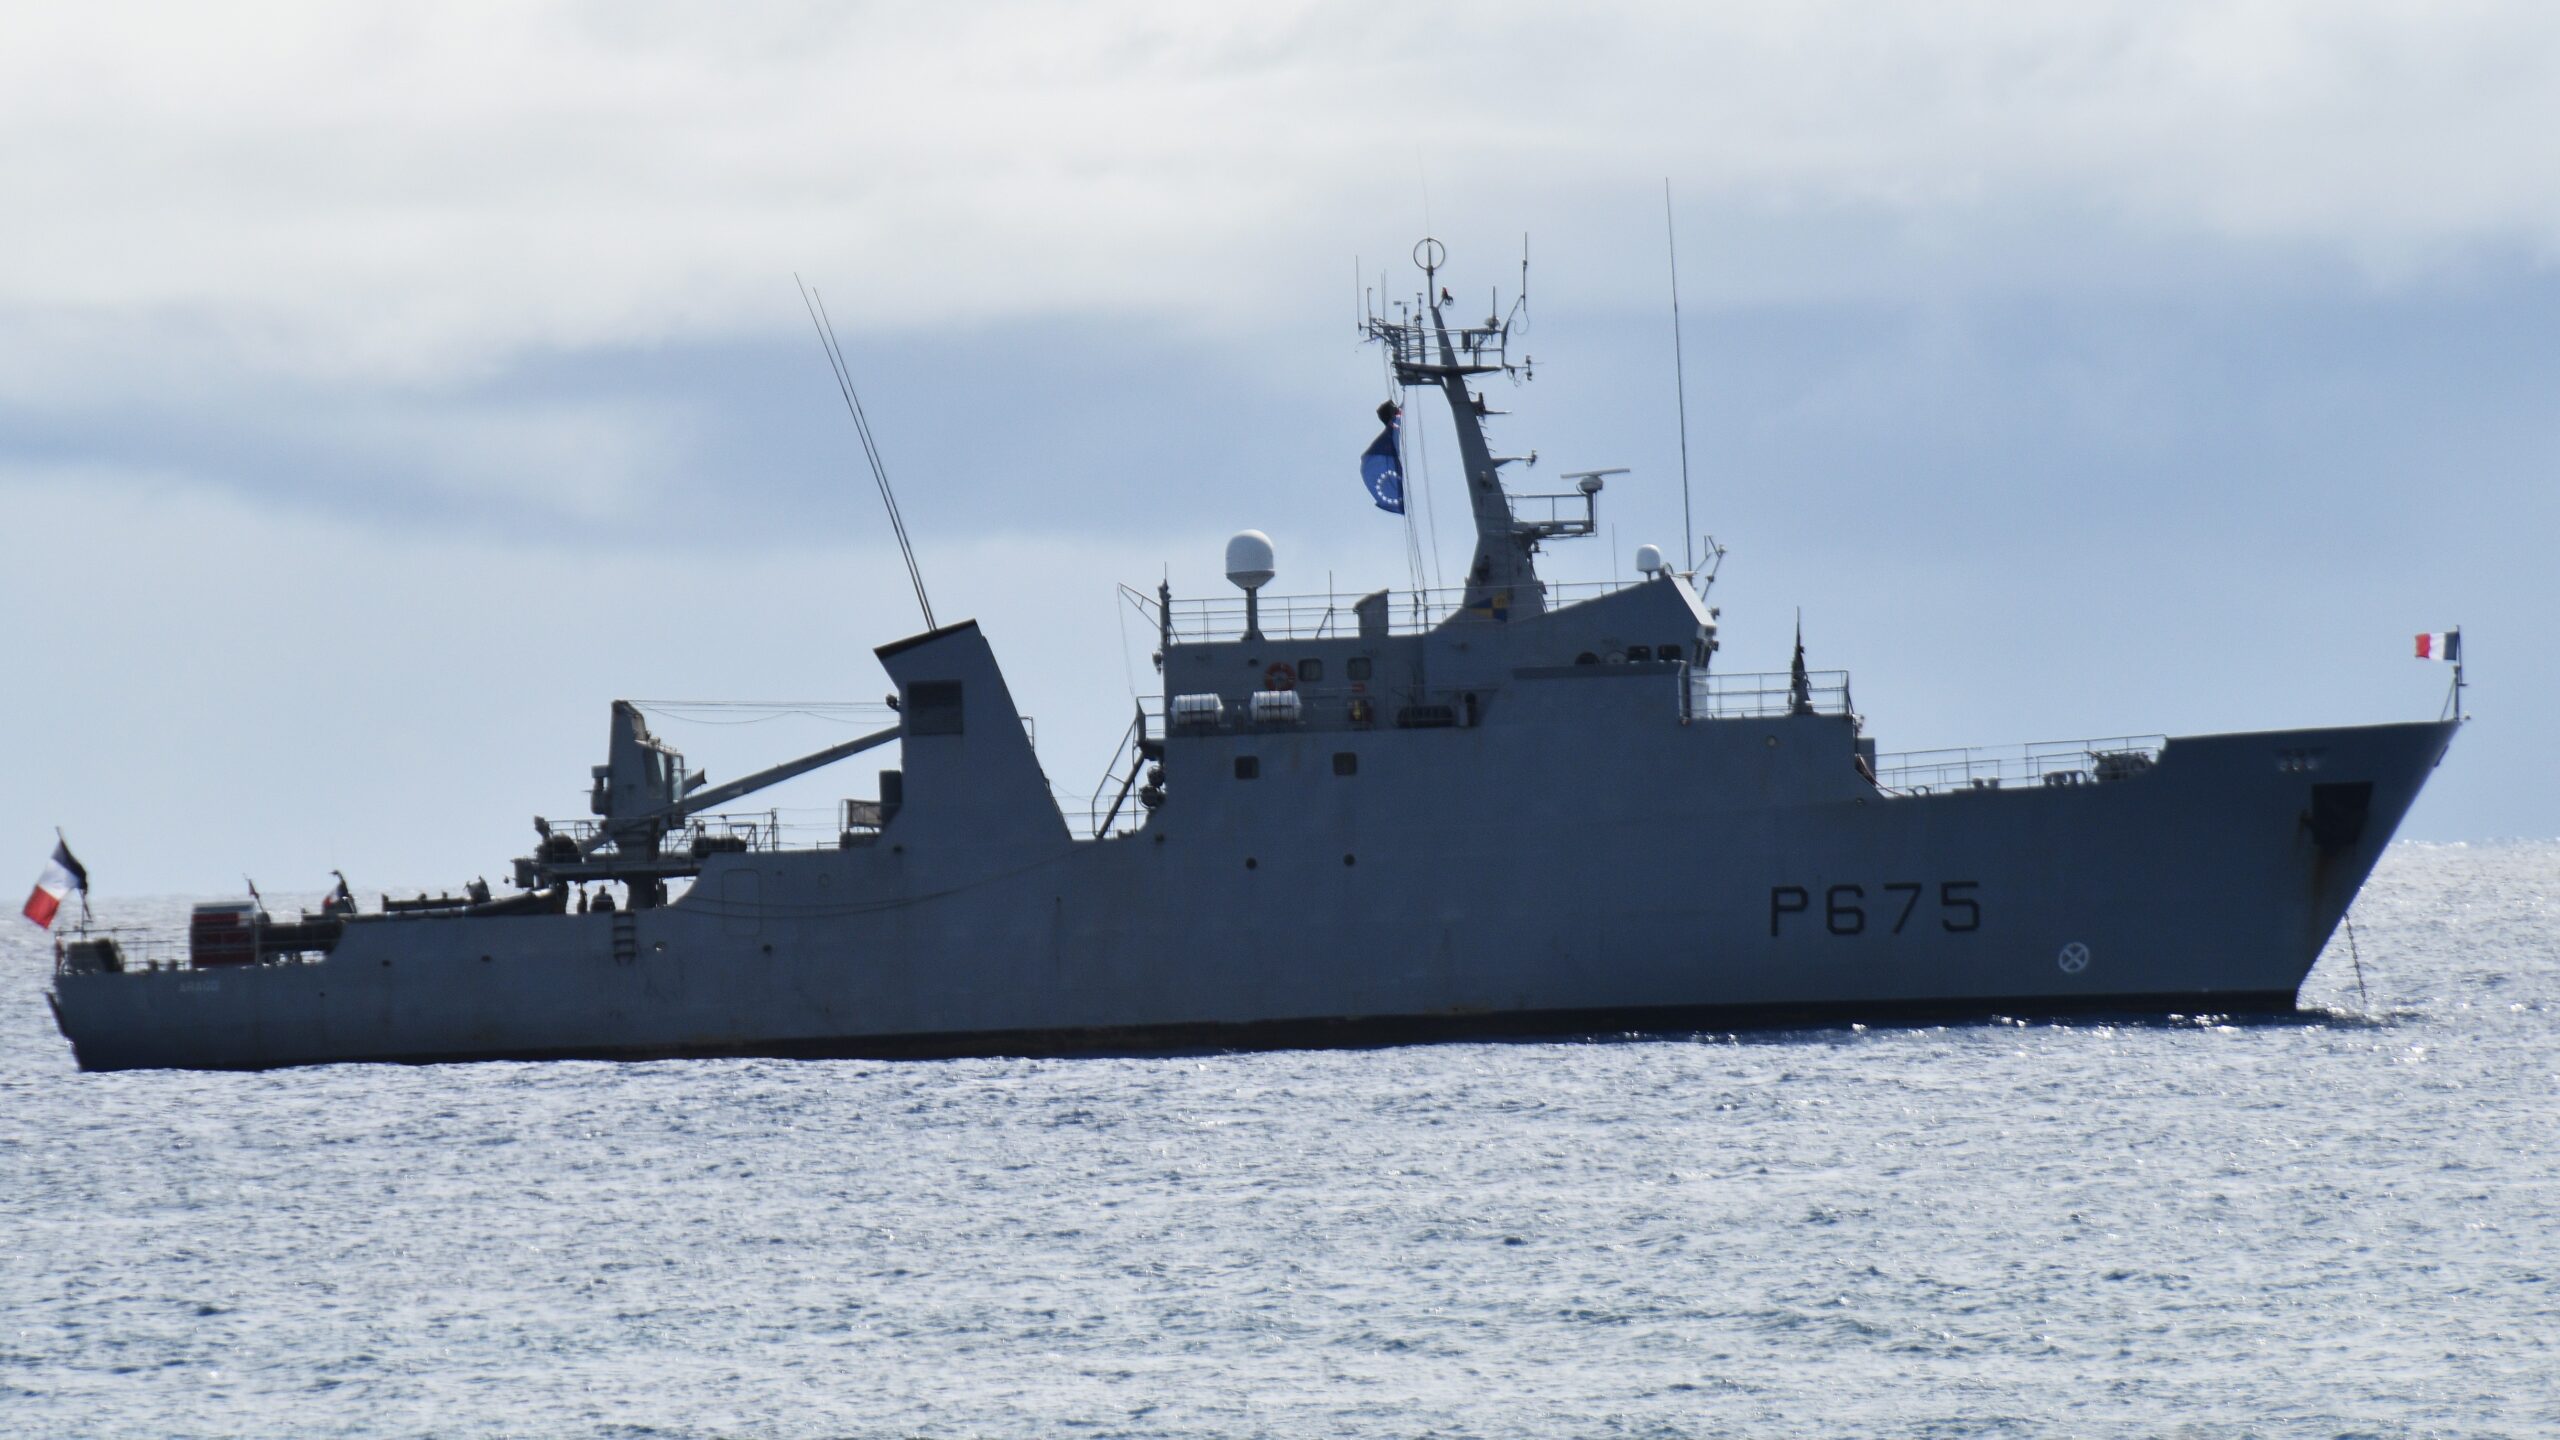 Visiting French naval vessel engaged in surveillance patrols